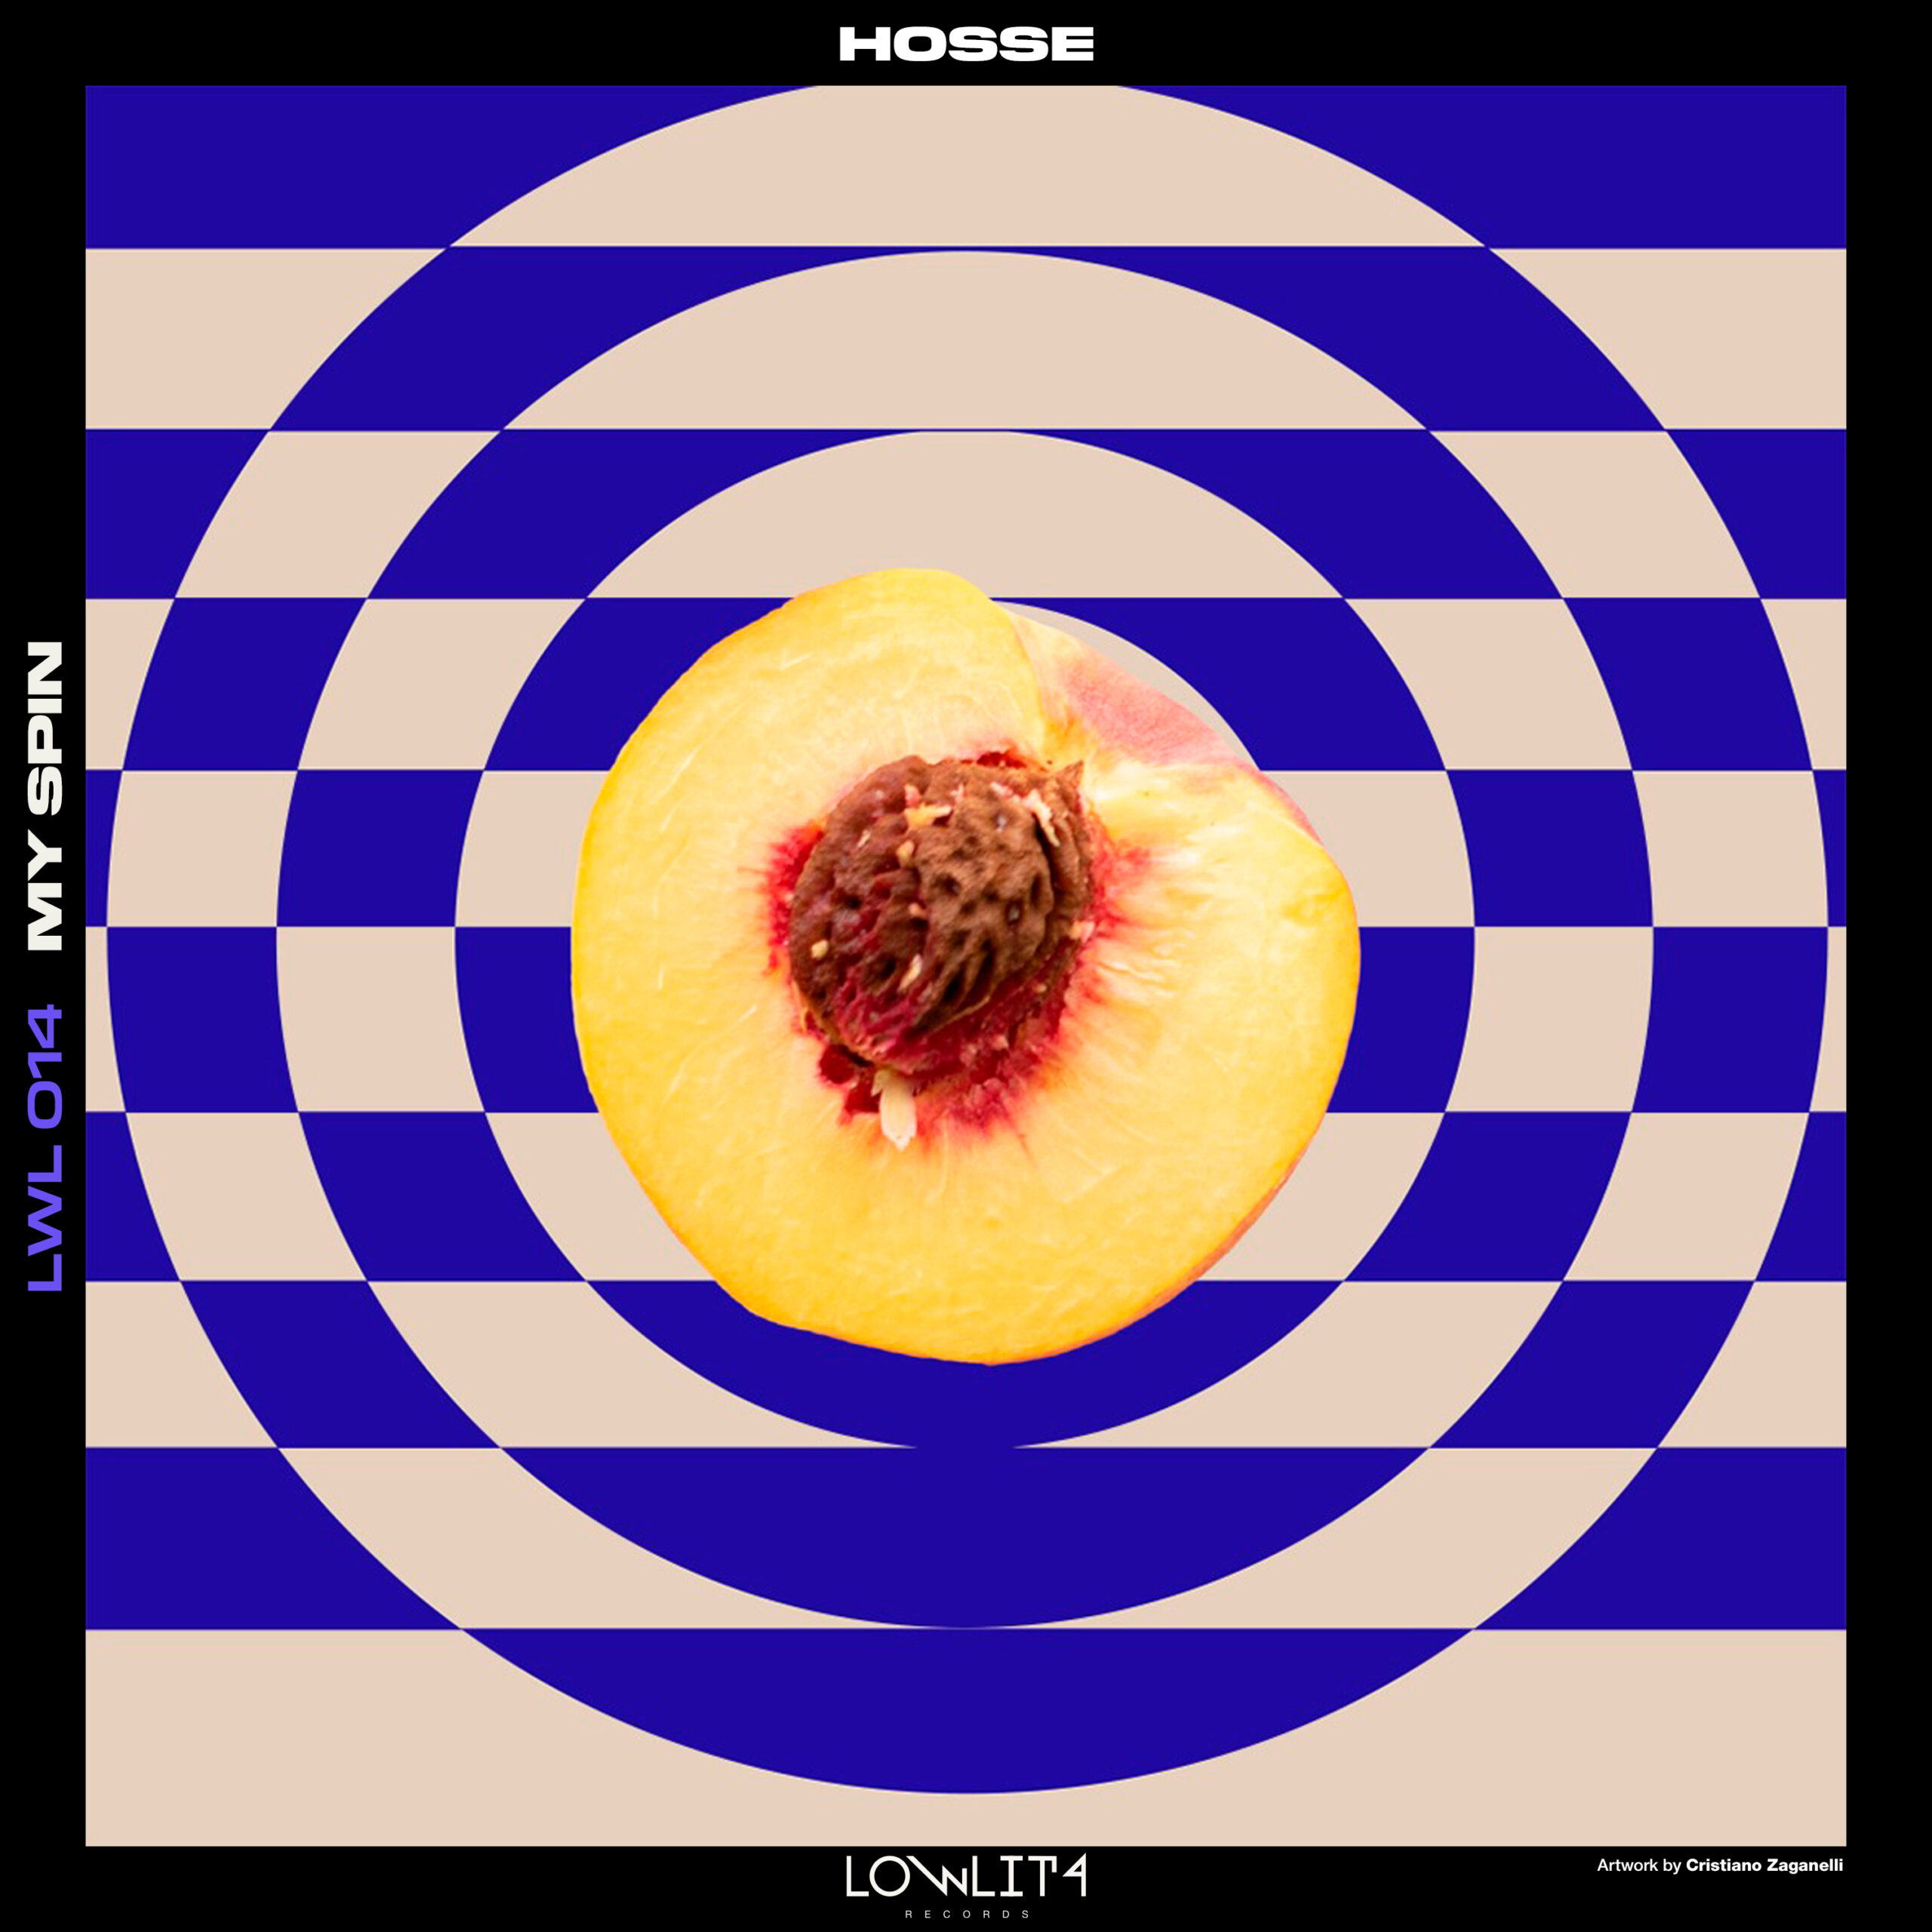 Lowlita Records is thrilled to present the latest release from Hosse, titled My “Spin”